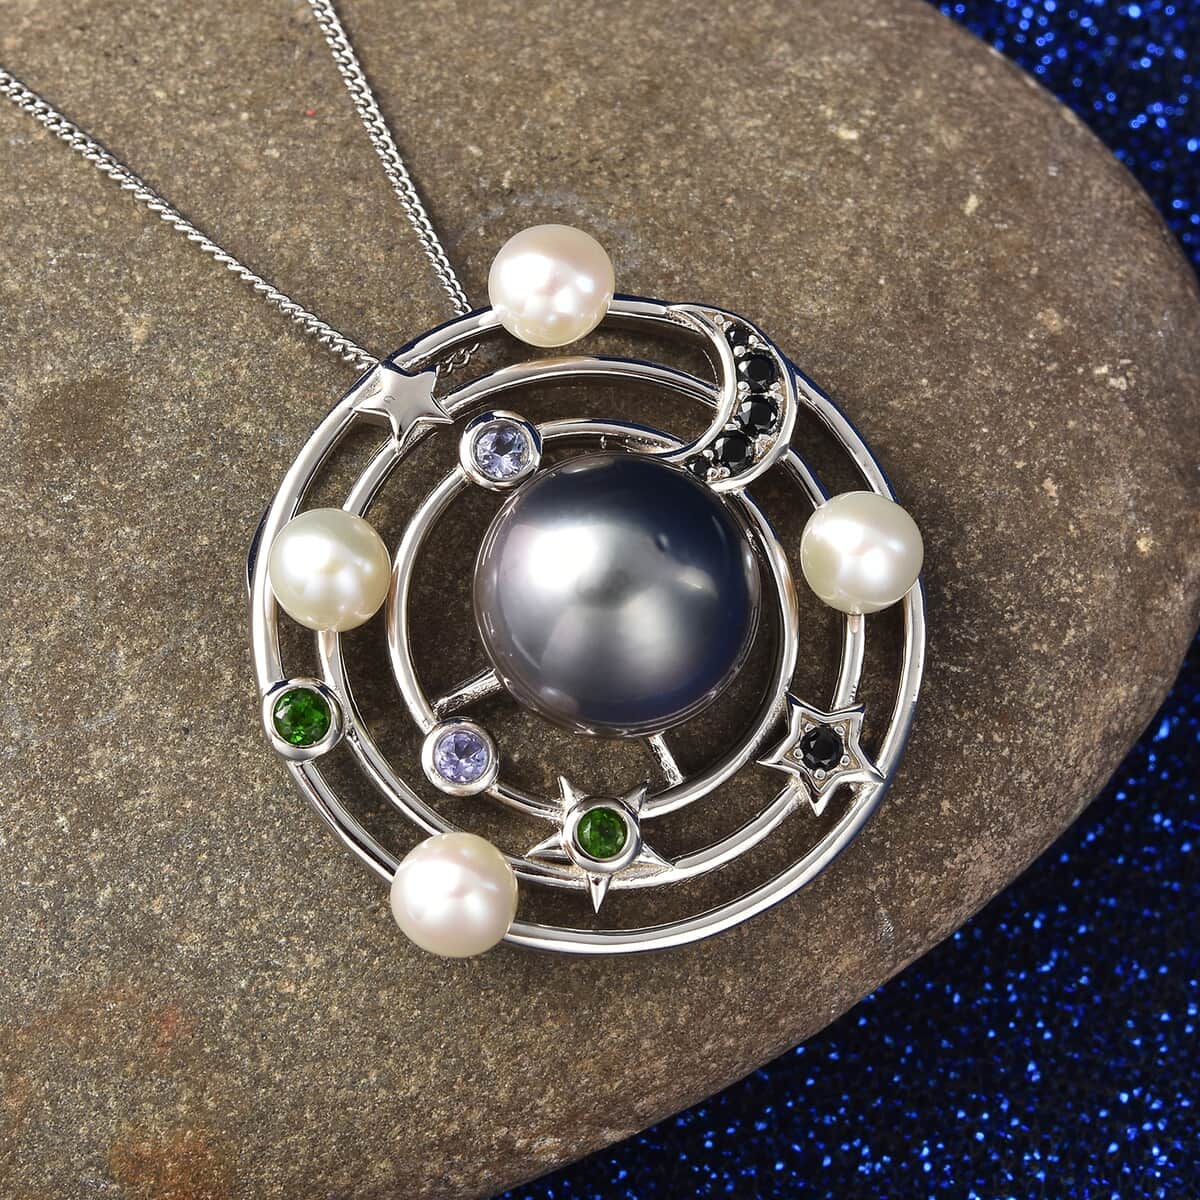 Tahitian Black Pearl Pendant Necklace , Multi Gemstone Pendant Necklace For Women , Sterling Silver Necklace , Solar System Pendant Necklace, Princess Length Necklace 18 Inches image number 1